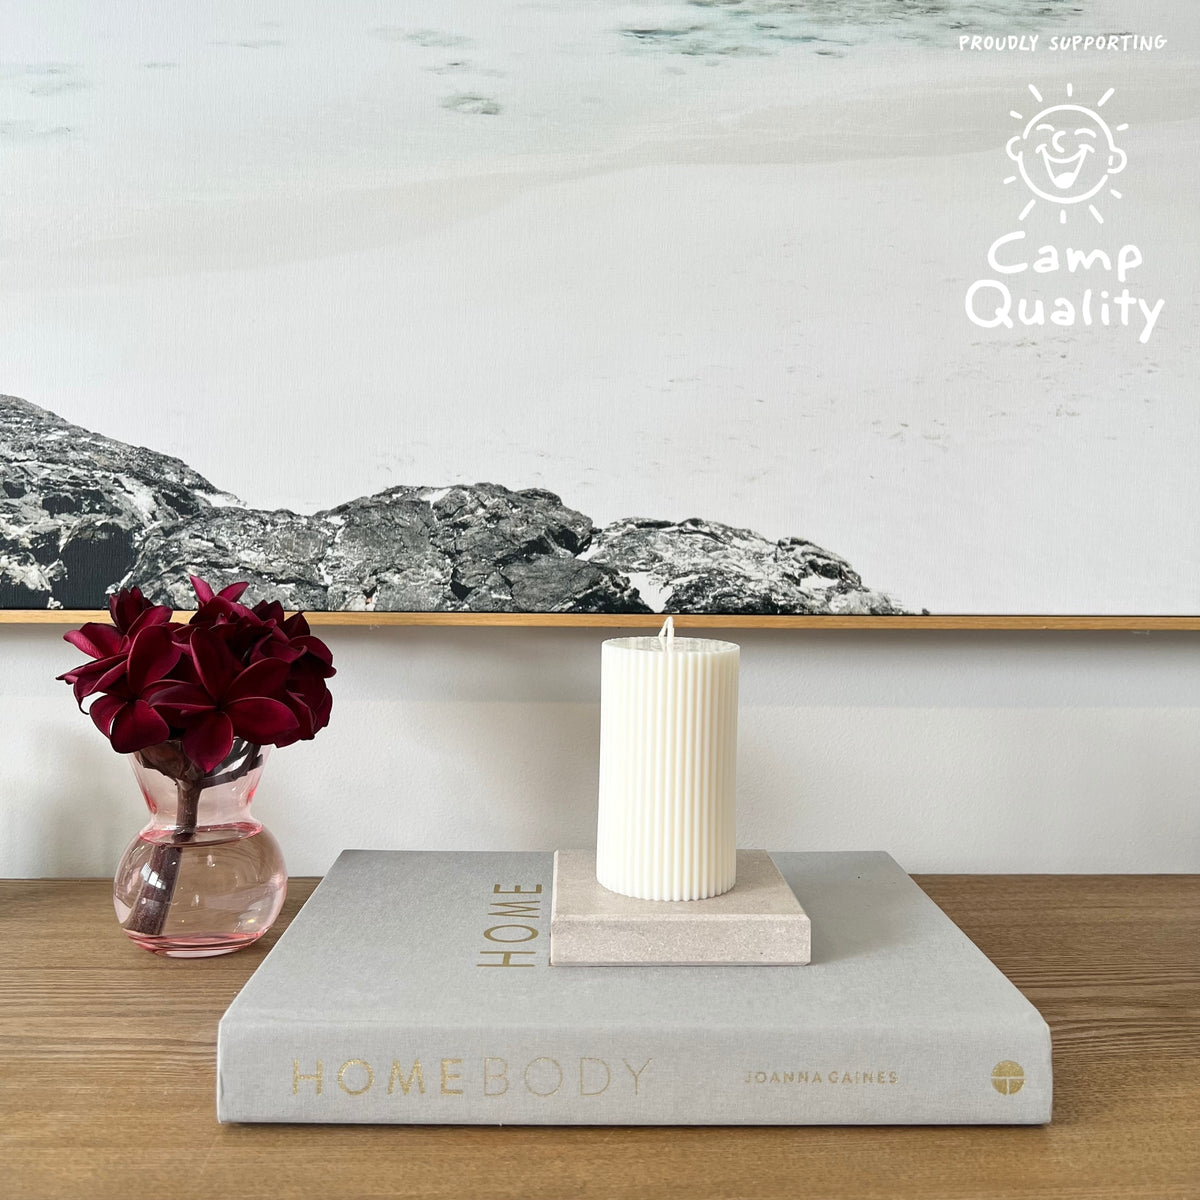 Quartz Square Candle Holder in Caesarstone Topus Concrete created by Aureliia Collection. Styled with Studio McKenna white pillar candle, upon Joanna Gaines book  next to vase with fresh flowers on timber table. This candle holder has full of movement, opacity, and depth of delicate mineral formations over a warm greige base, flushed with rugged patinas and pastel-pink undertones. The perfect home decor item.